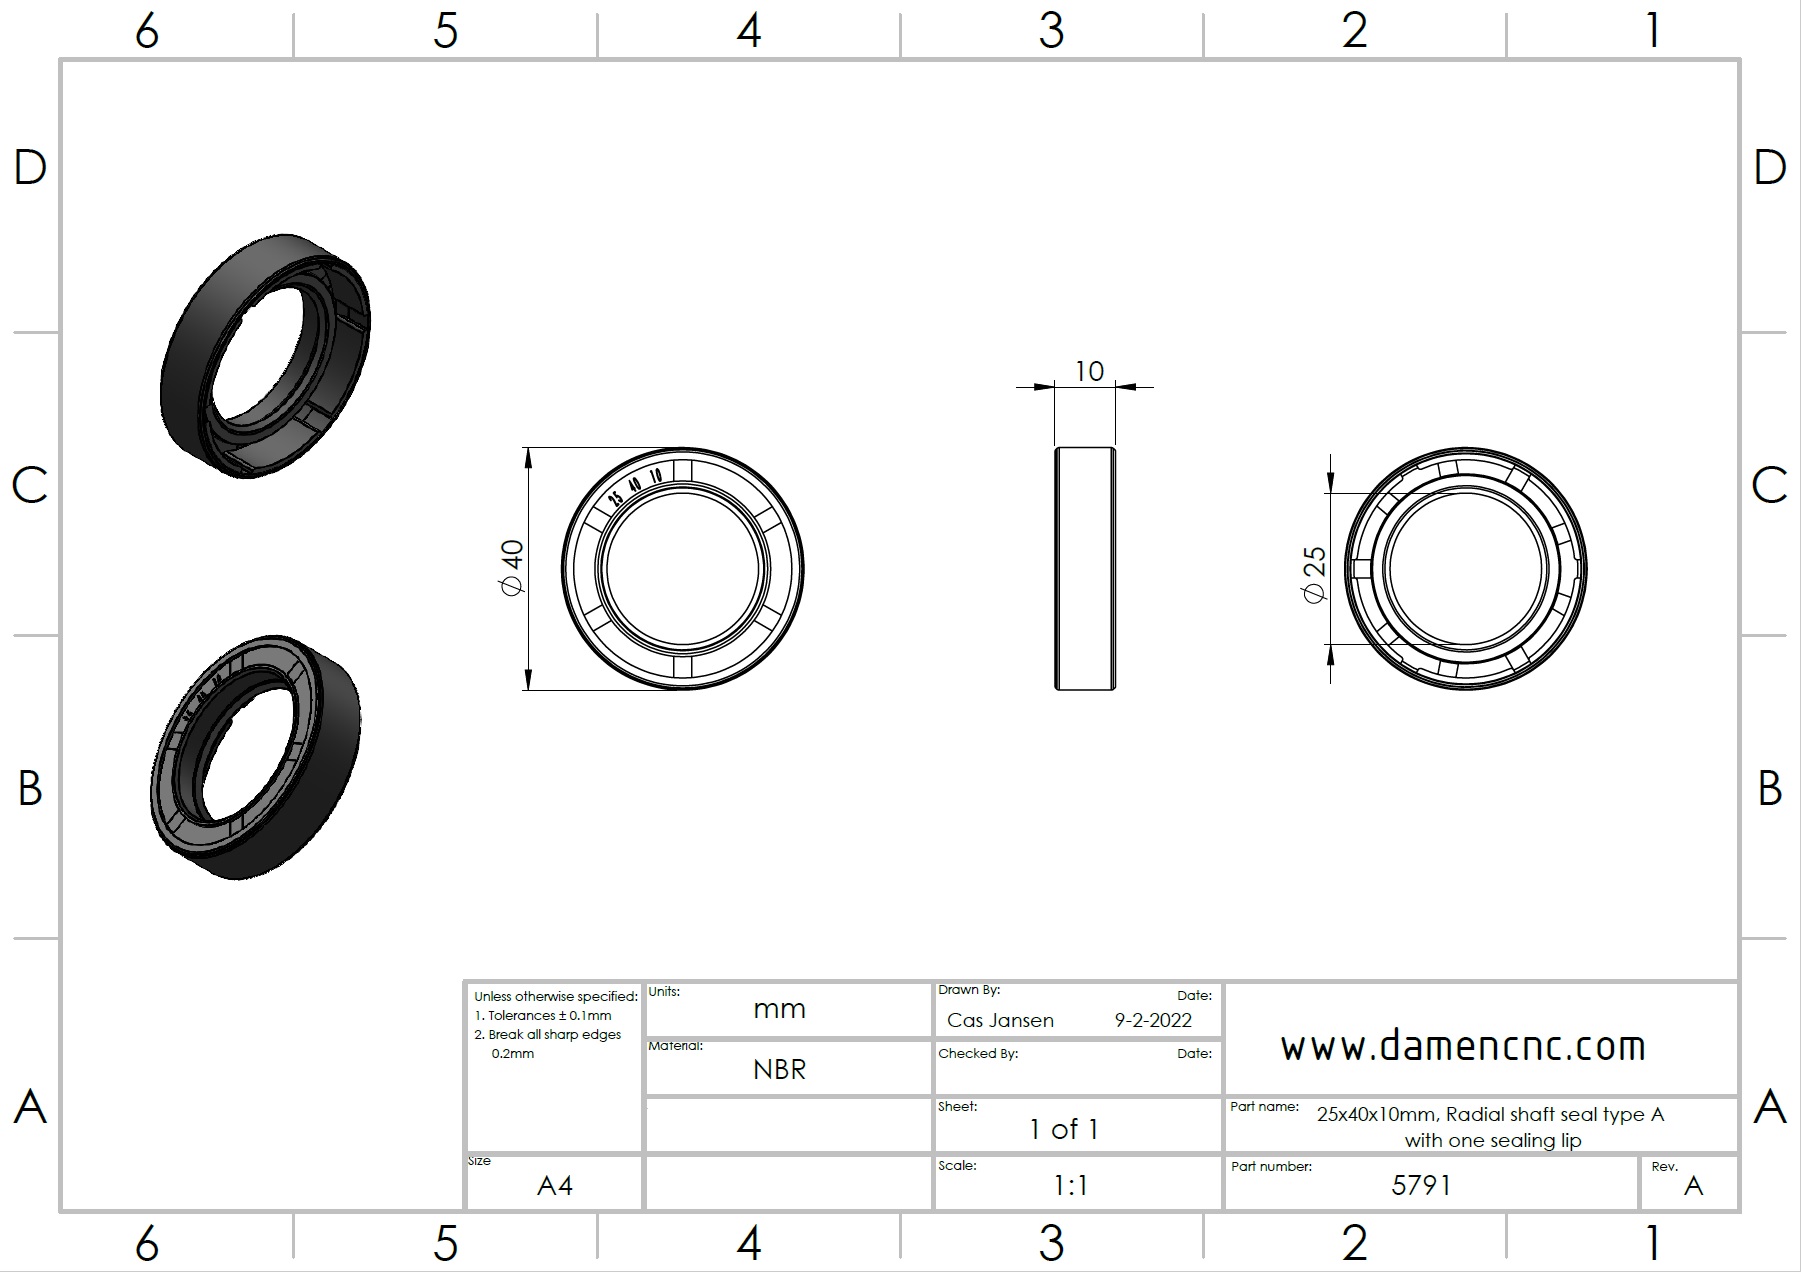 57913 25x40x10mm radial shaft seal type a with one sealing lip 2d dimensions